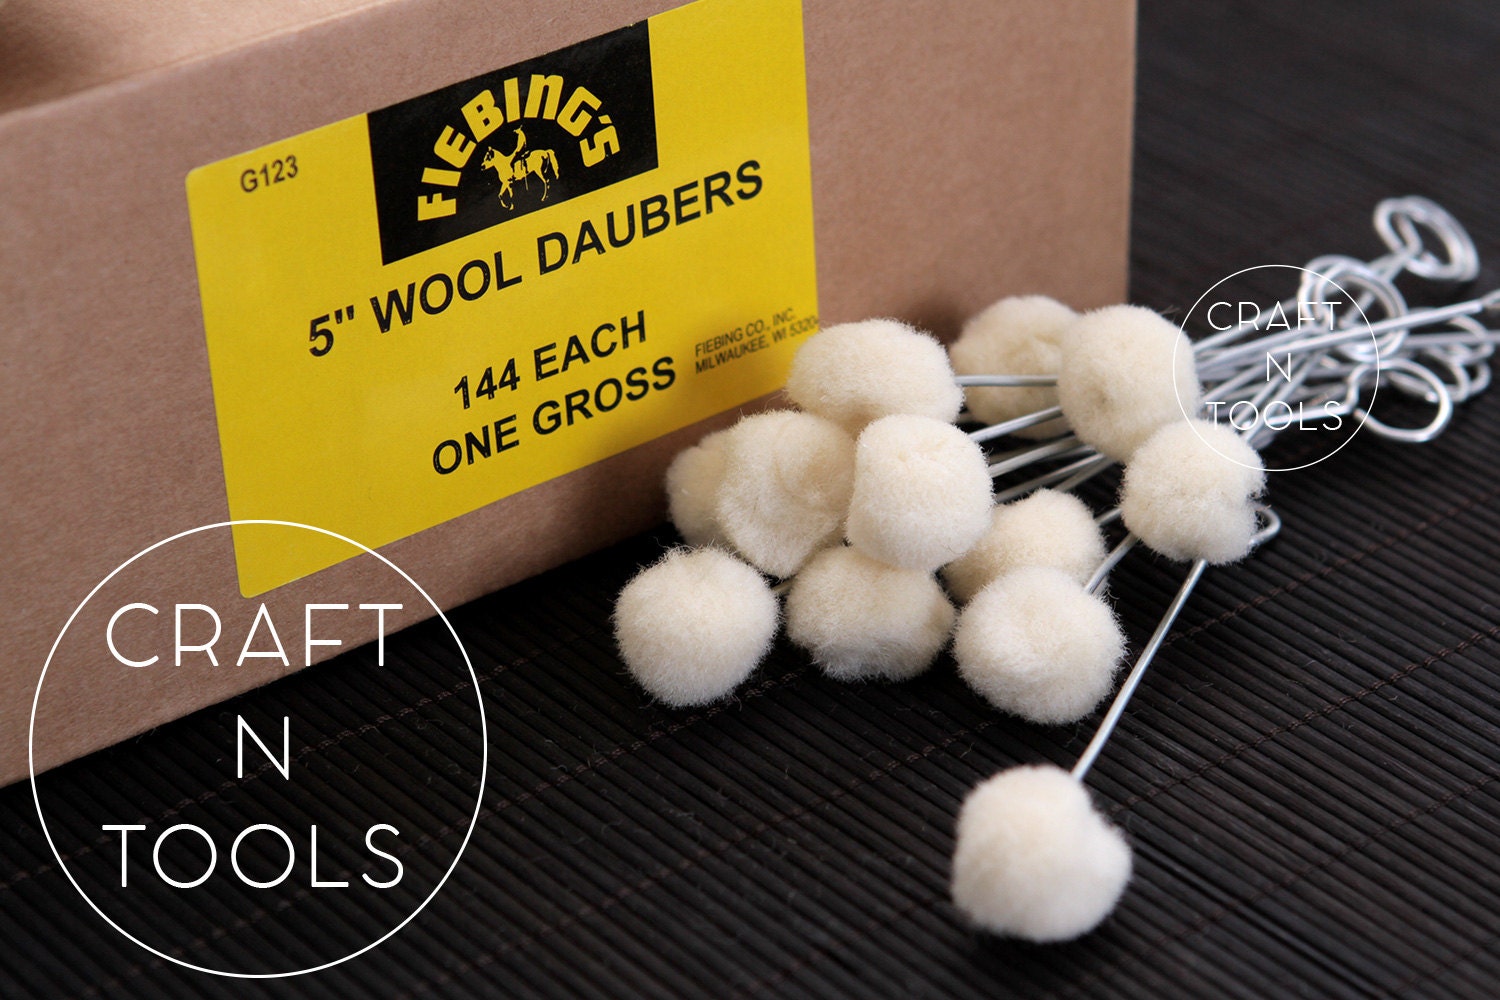 Large Head Wool Daubers for Dyes, Stains 3/4 (25)